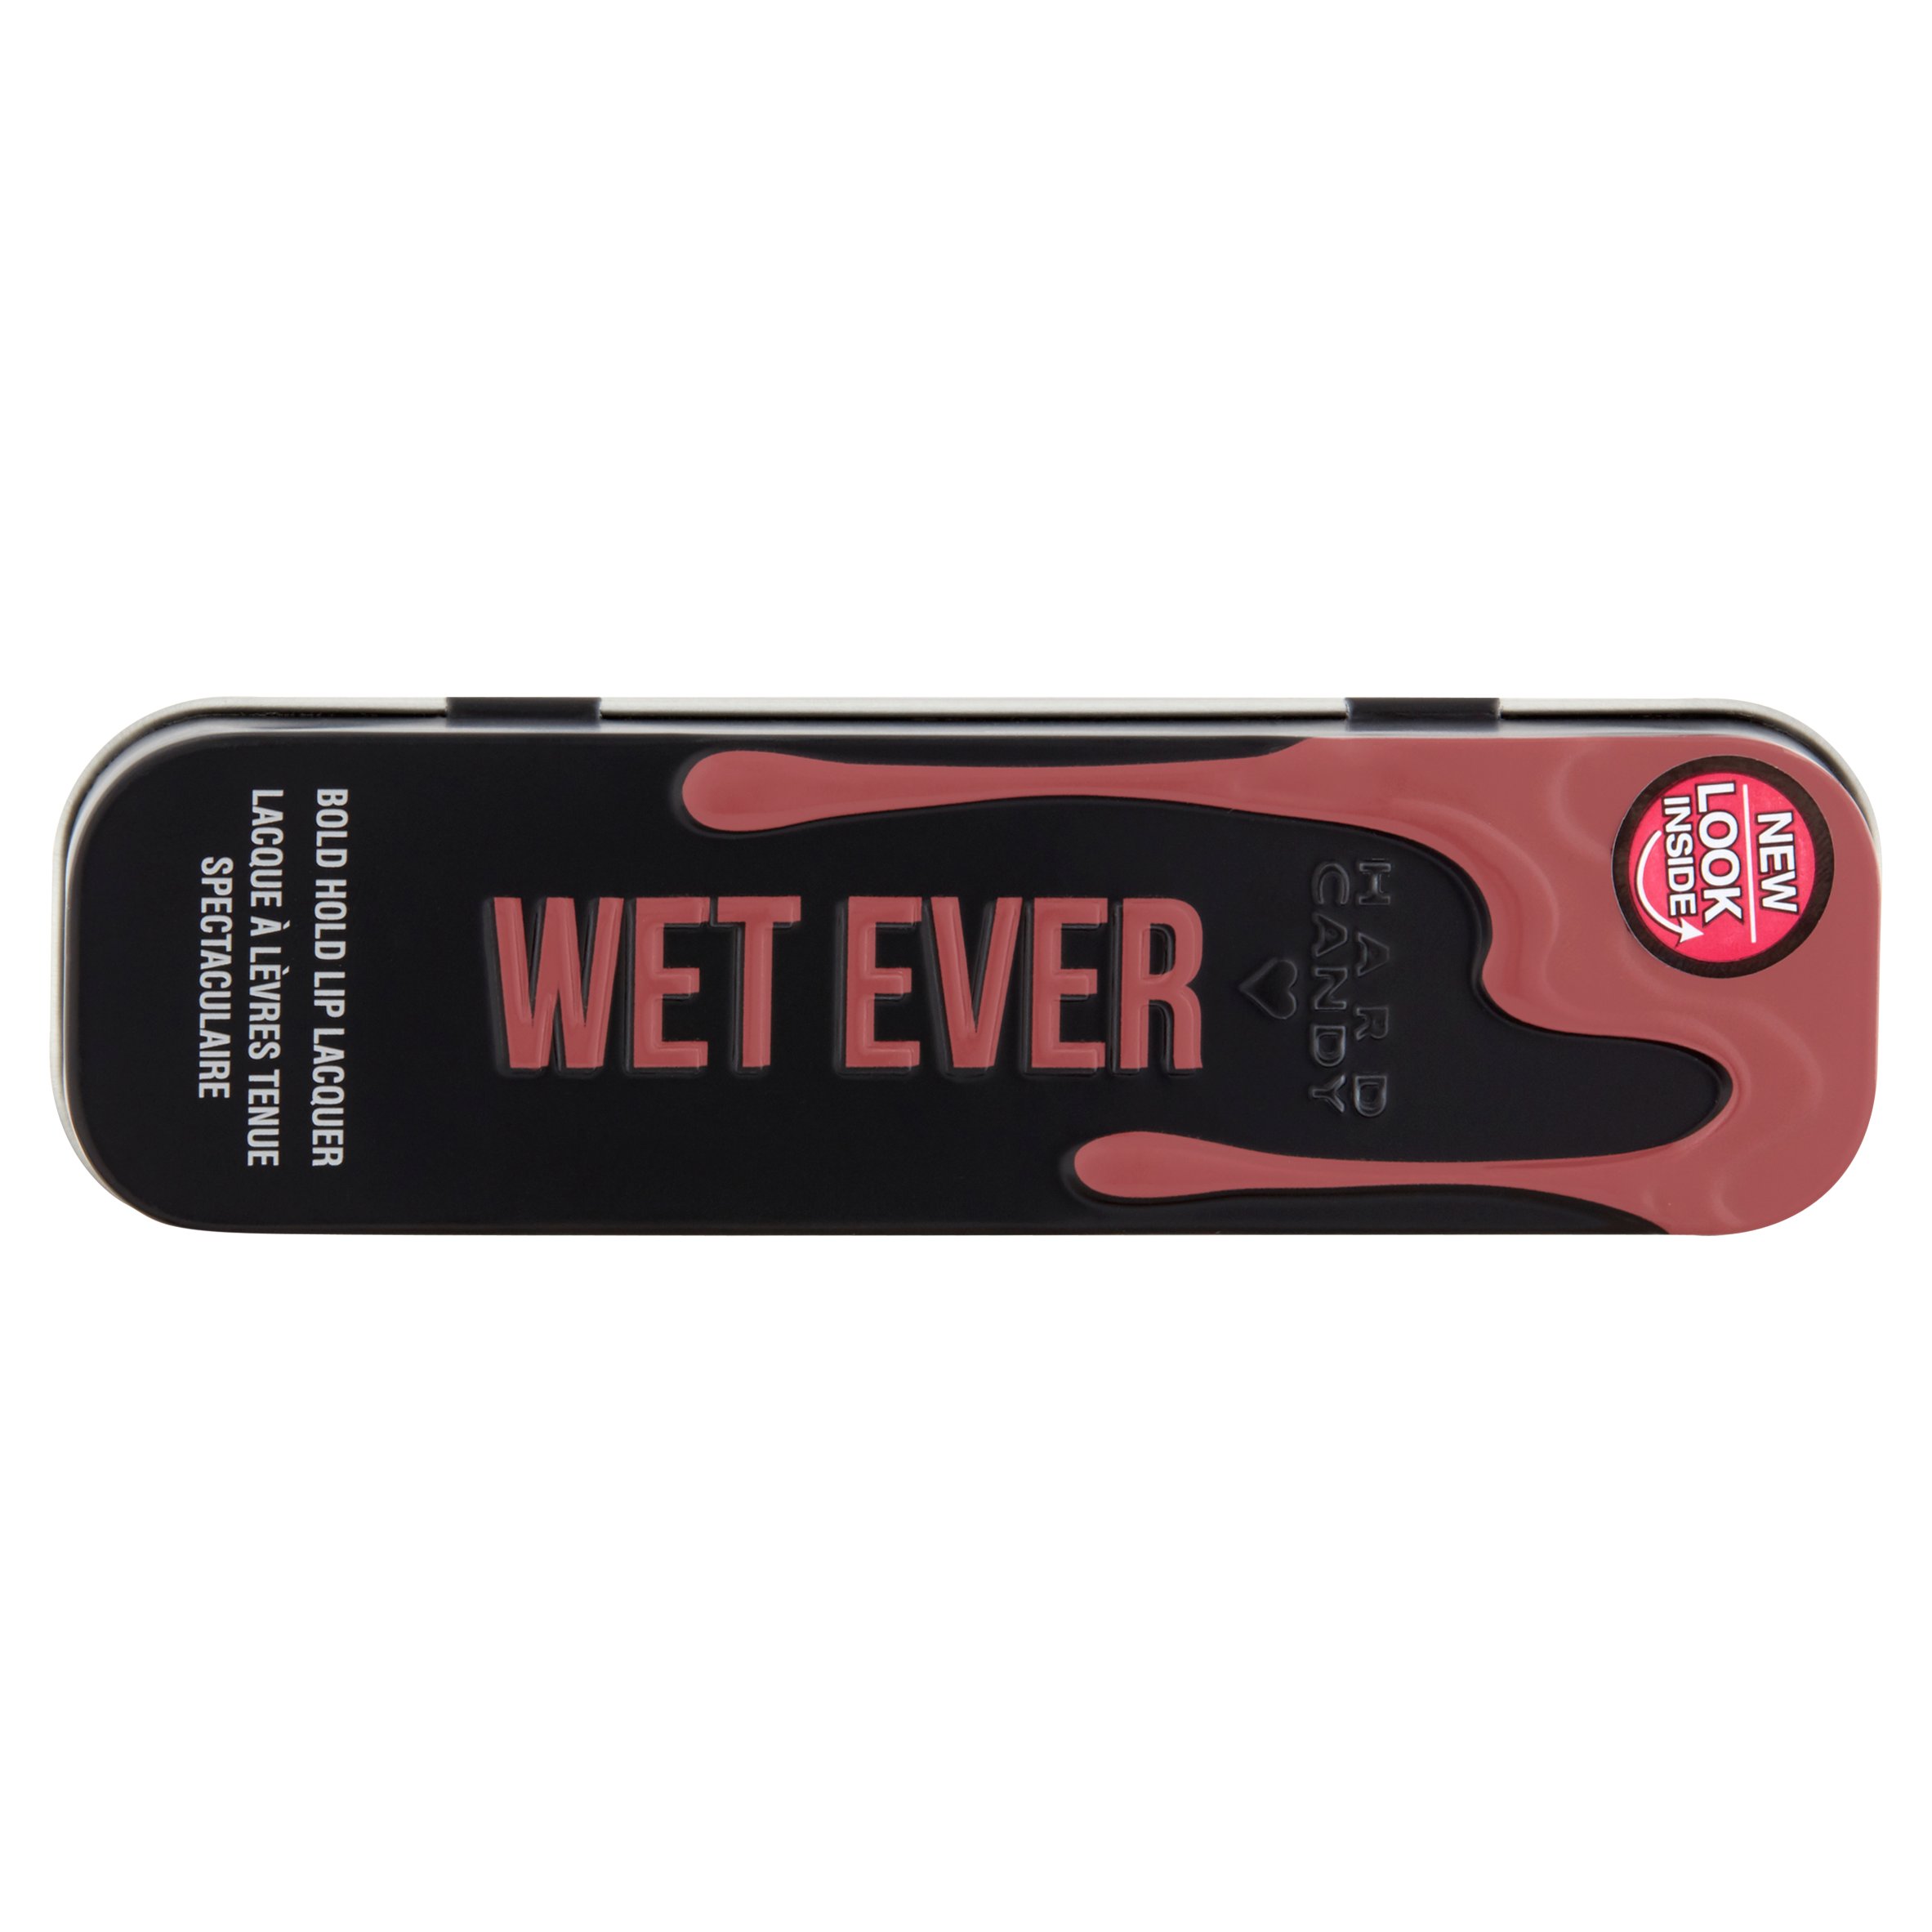 Hard Candy Wet Ever Bold Hold Lip Lacquer Tin, 1206 Genius - image 1 of 5